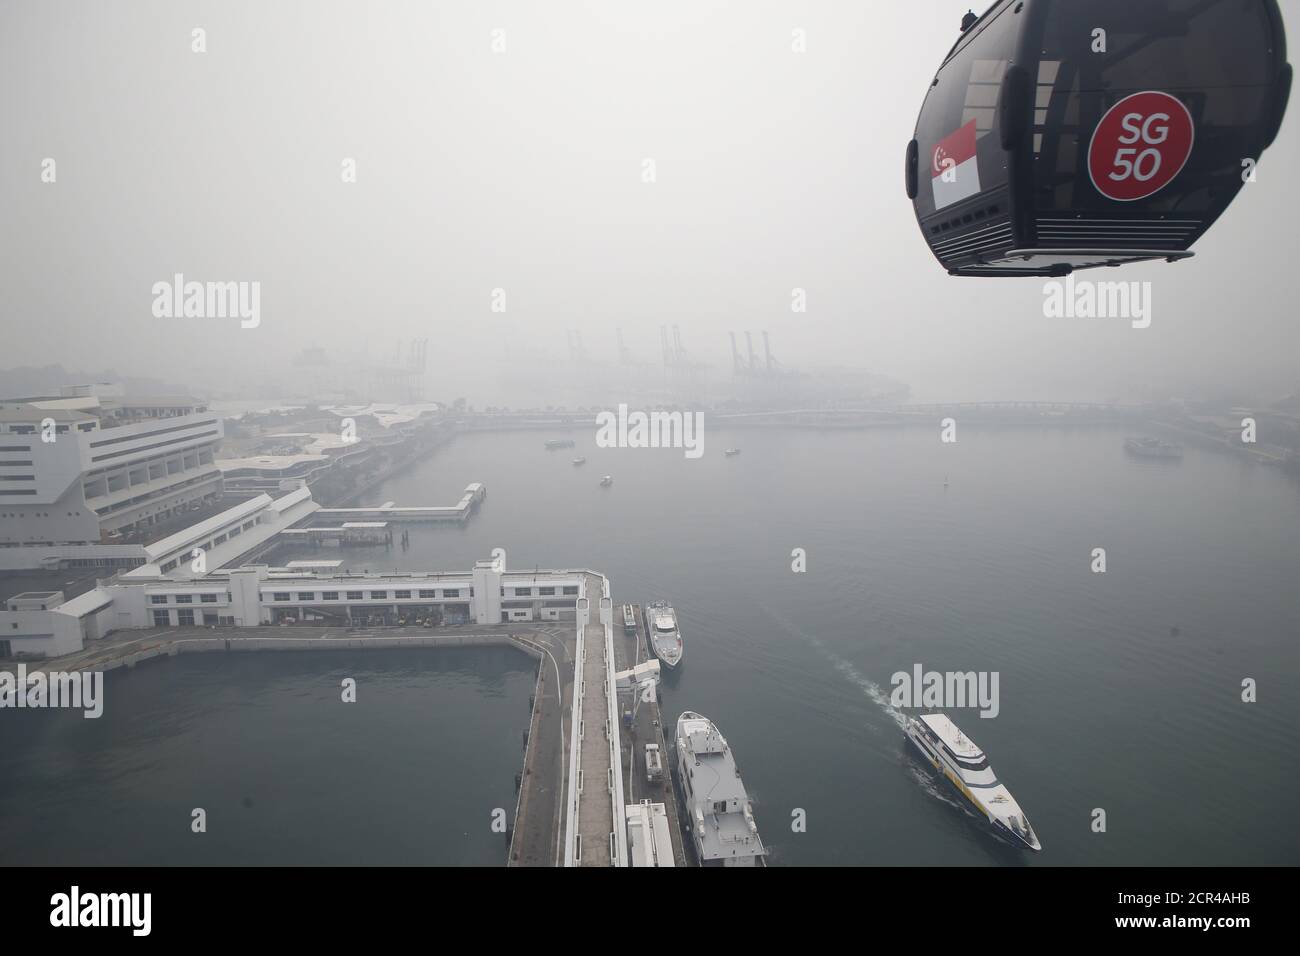 A cable car travelling between Mount Faber and Sentosa passes the skyline of the central business district and PSA International's Keppel and Brani container terminals shrouded by haze in Singapore September 29, 2015. The 3-hour haze Pollutant Standards Index (PSI) was at 205 at 11am on Tuesday, according to the National Environment Agency. Slash-and-burn agriculture in neighbouring Indonesia has blanketed Singapore in a choking haze for weeks.   REUTERS/Edgar Su Stock Photo